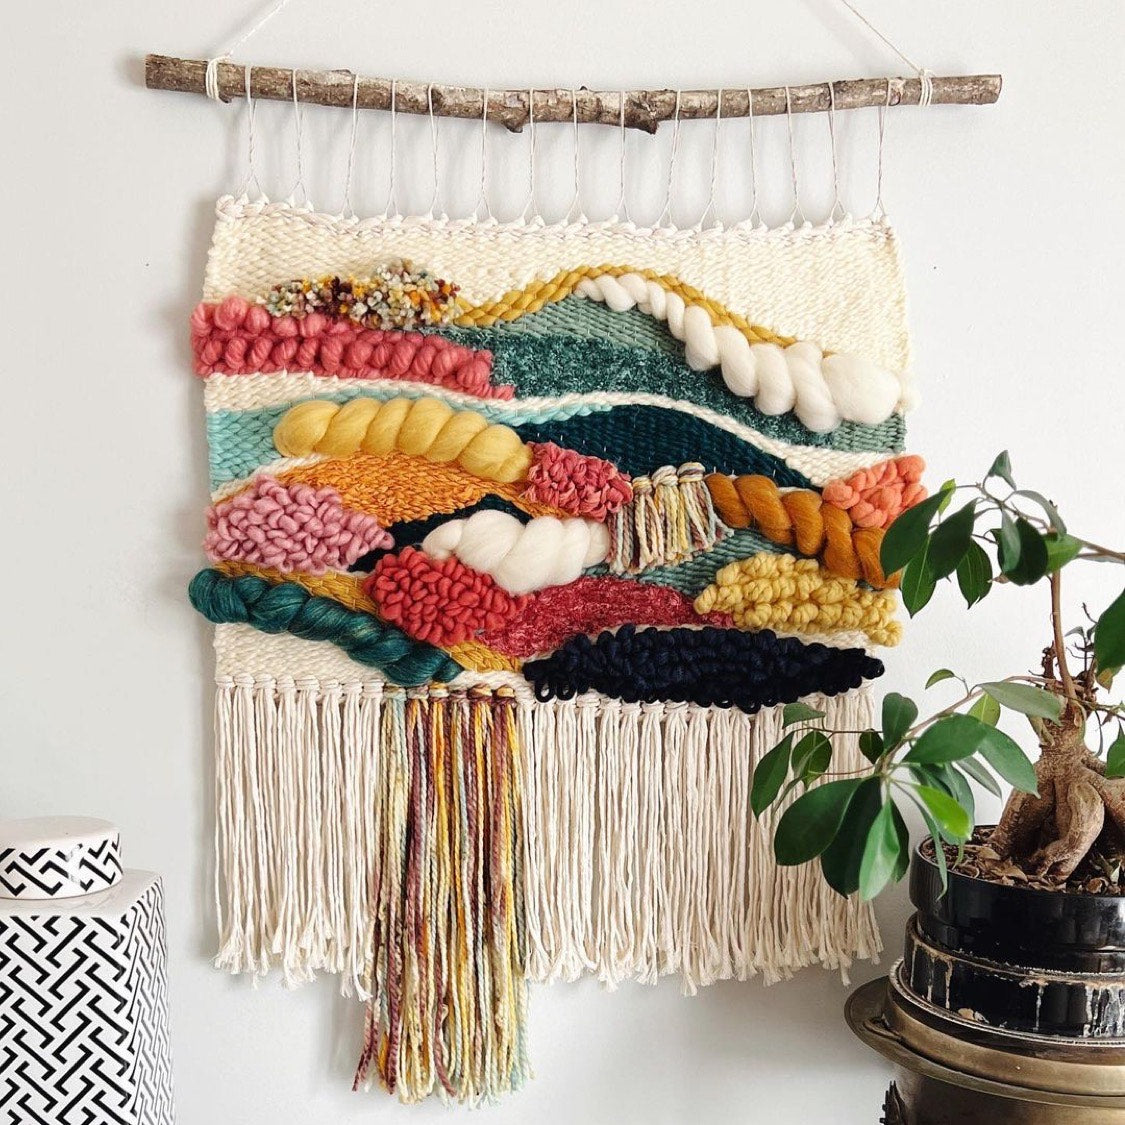 Woven Wall Hanging using dyed wool rovings and spinning fibers